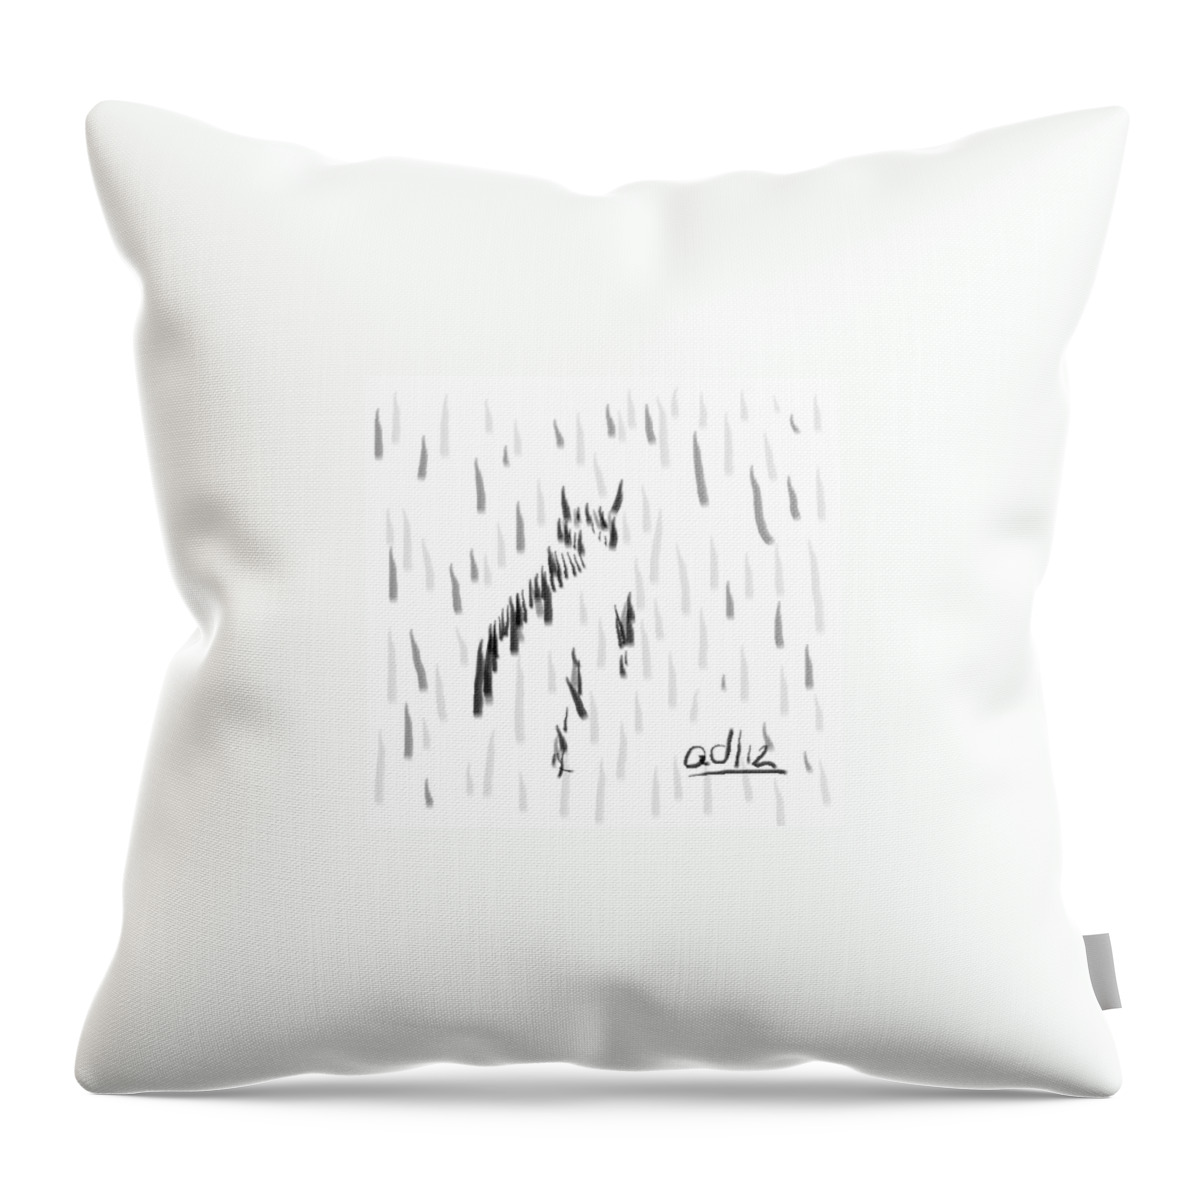 Bashful Without Line Throw Pillow featuring the painting Bashful Without Line by Anita Dale Livaditis